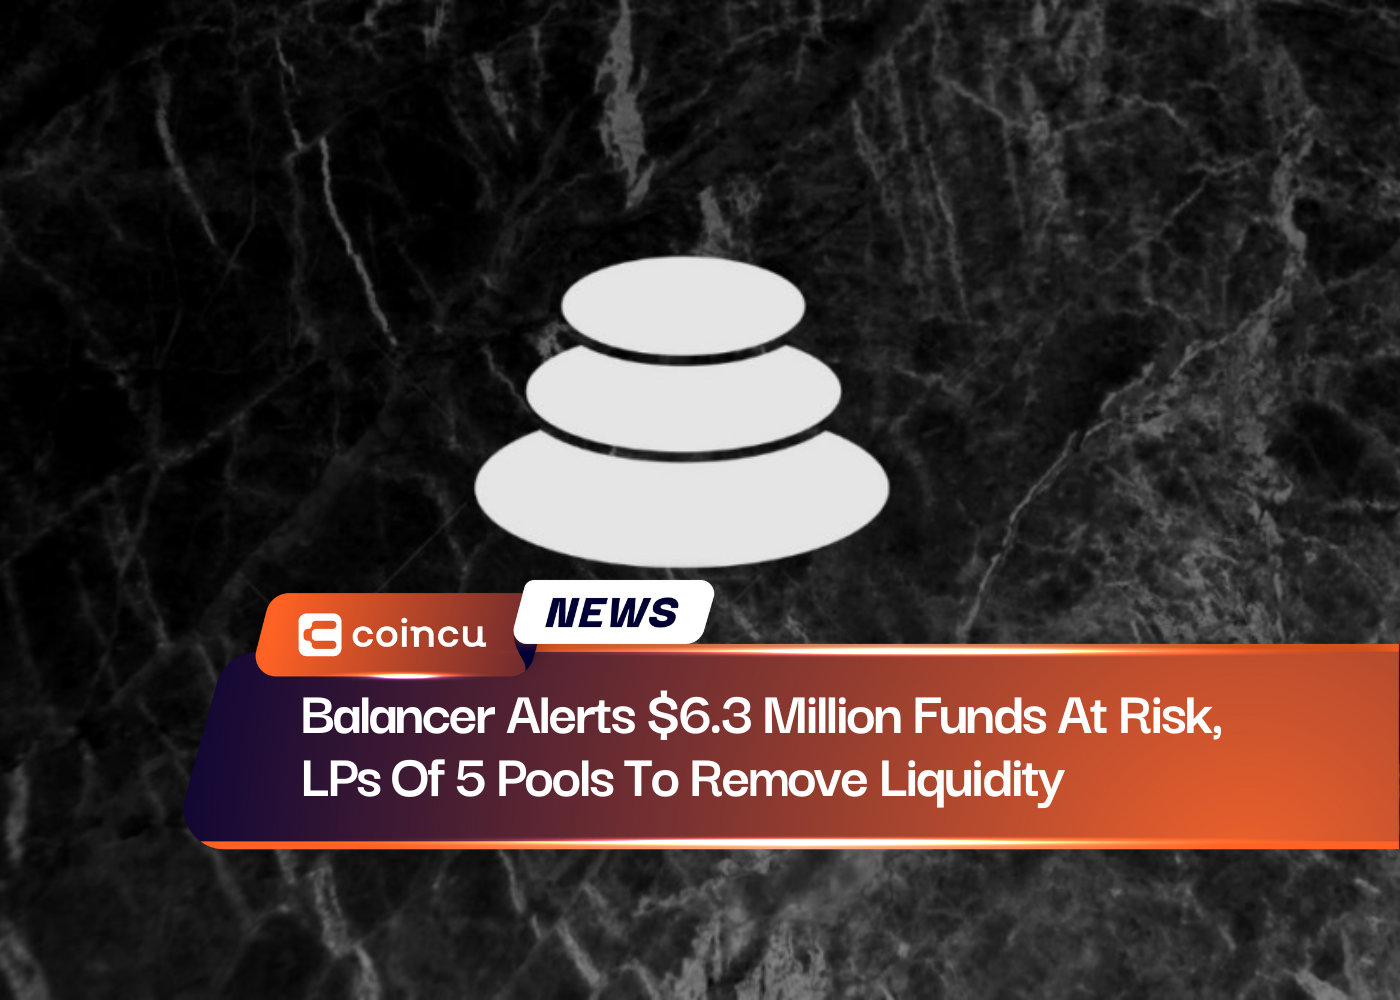 Balancer Alerts $6.3 Million Funds At Risk, LPs Of 5 Pools To Remove Liquidity